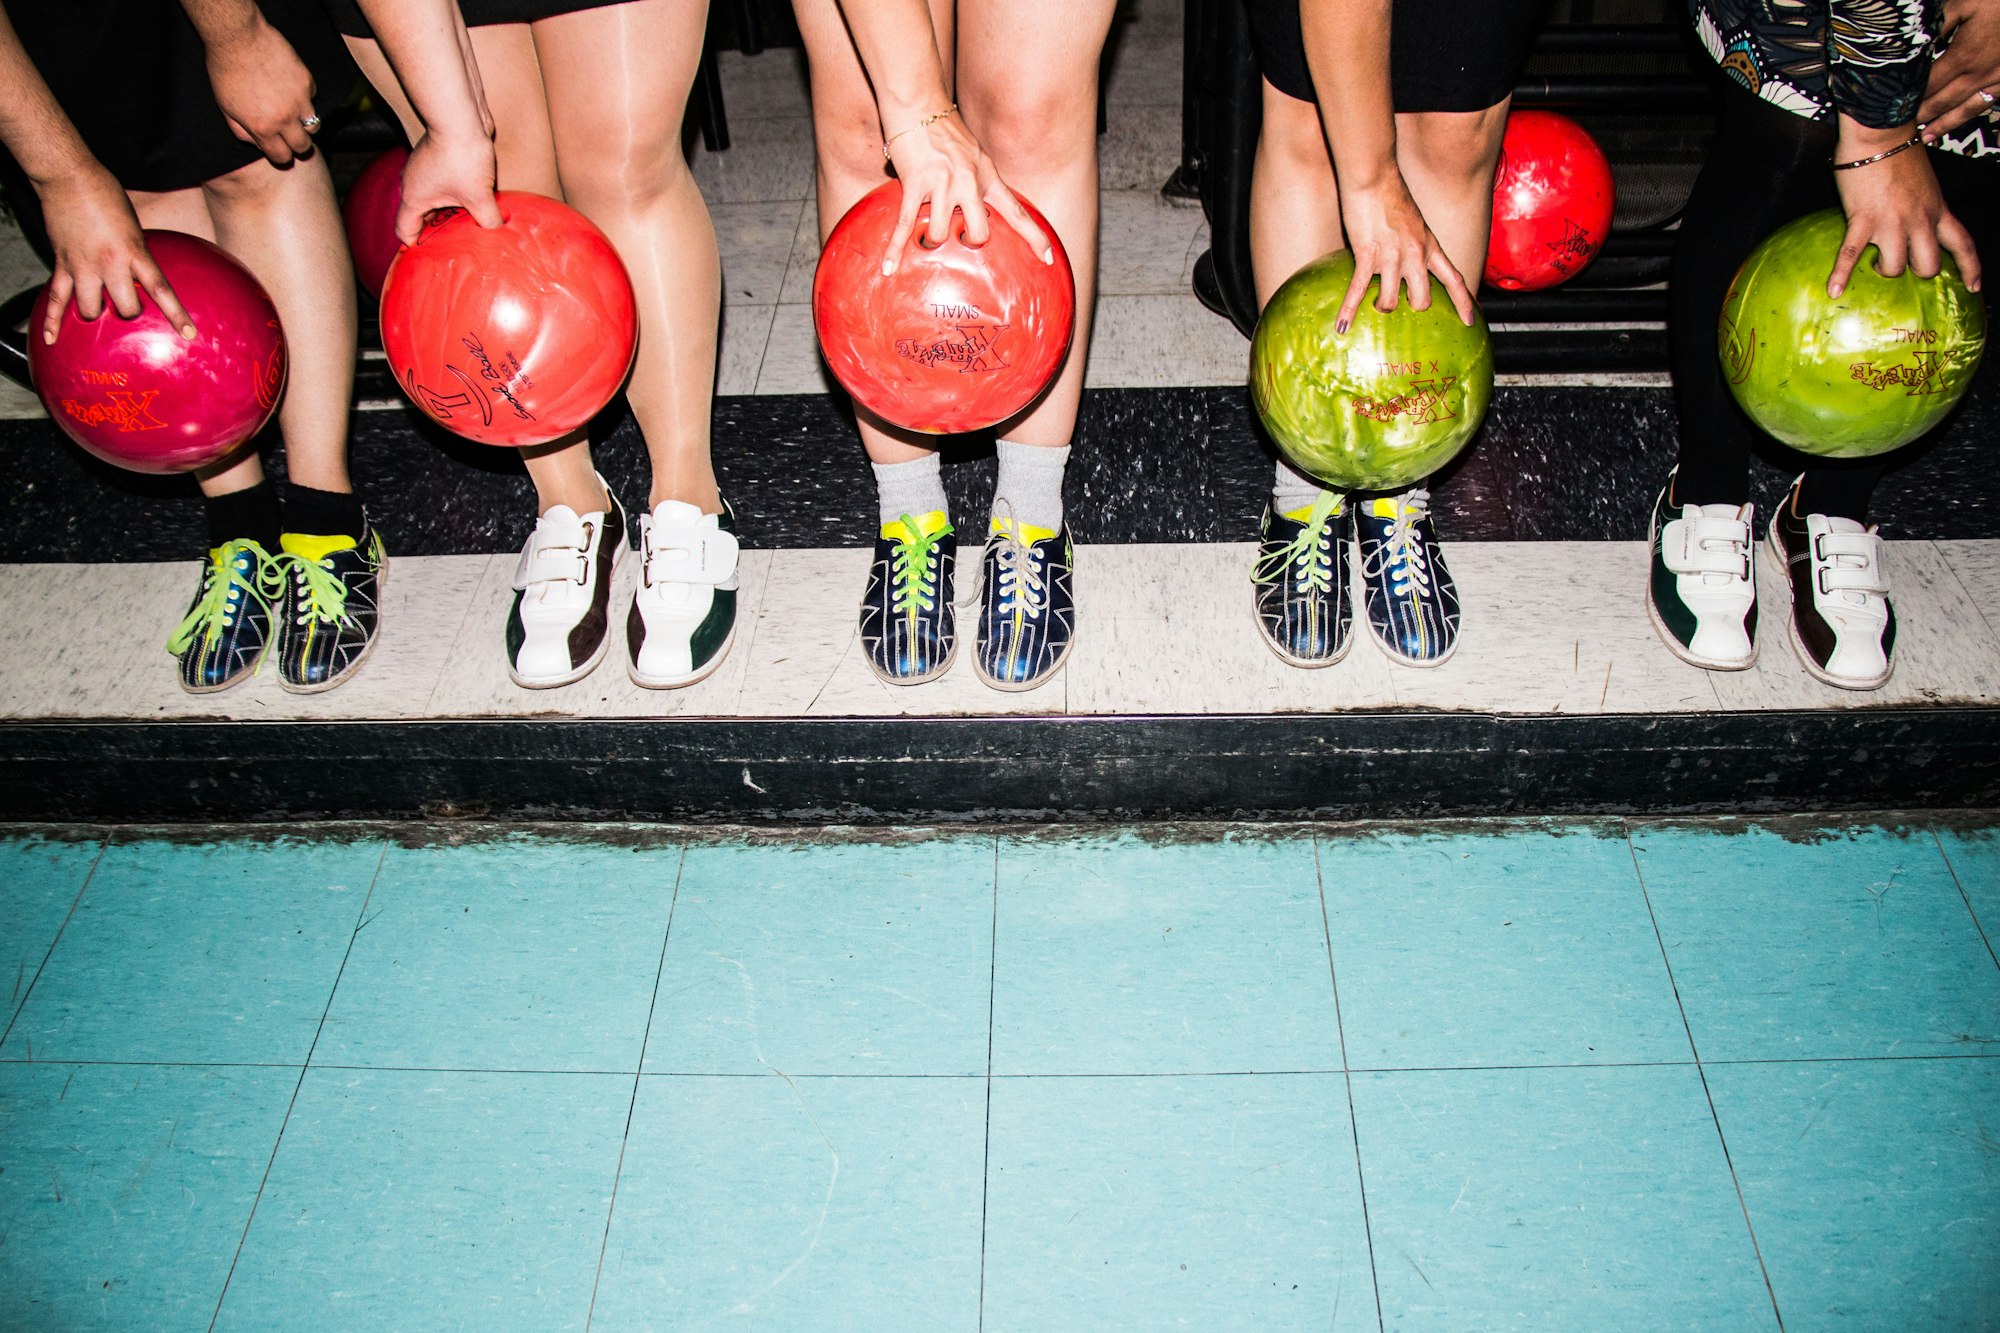 Group of people holding ten pin bowling balls in front of their feet